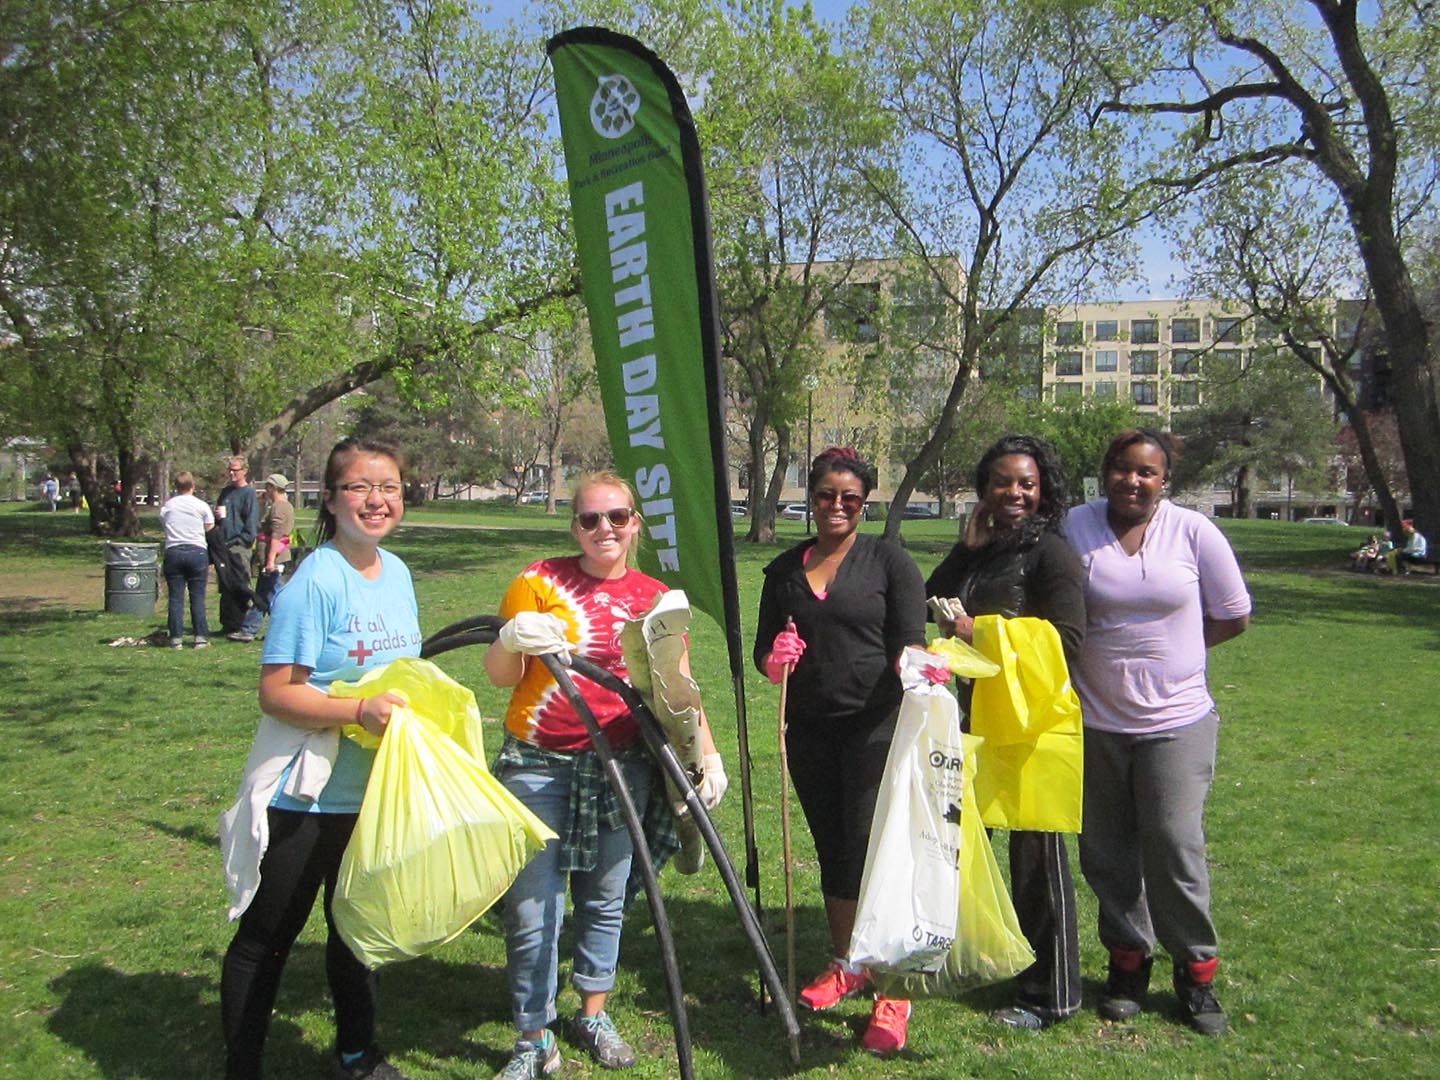 People cleaning up a park on Earth Day. Organized by Marcy-Holmes Neighborhood Association.